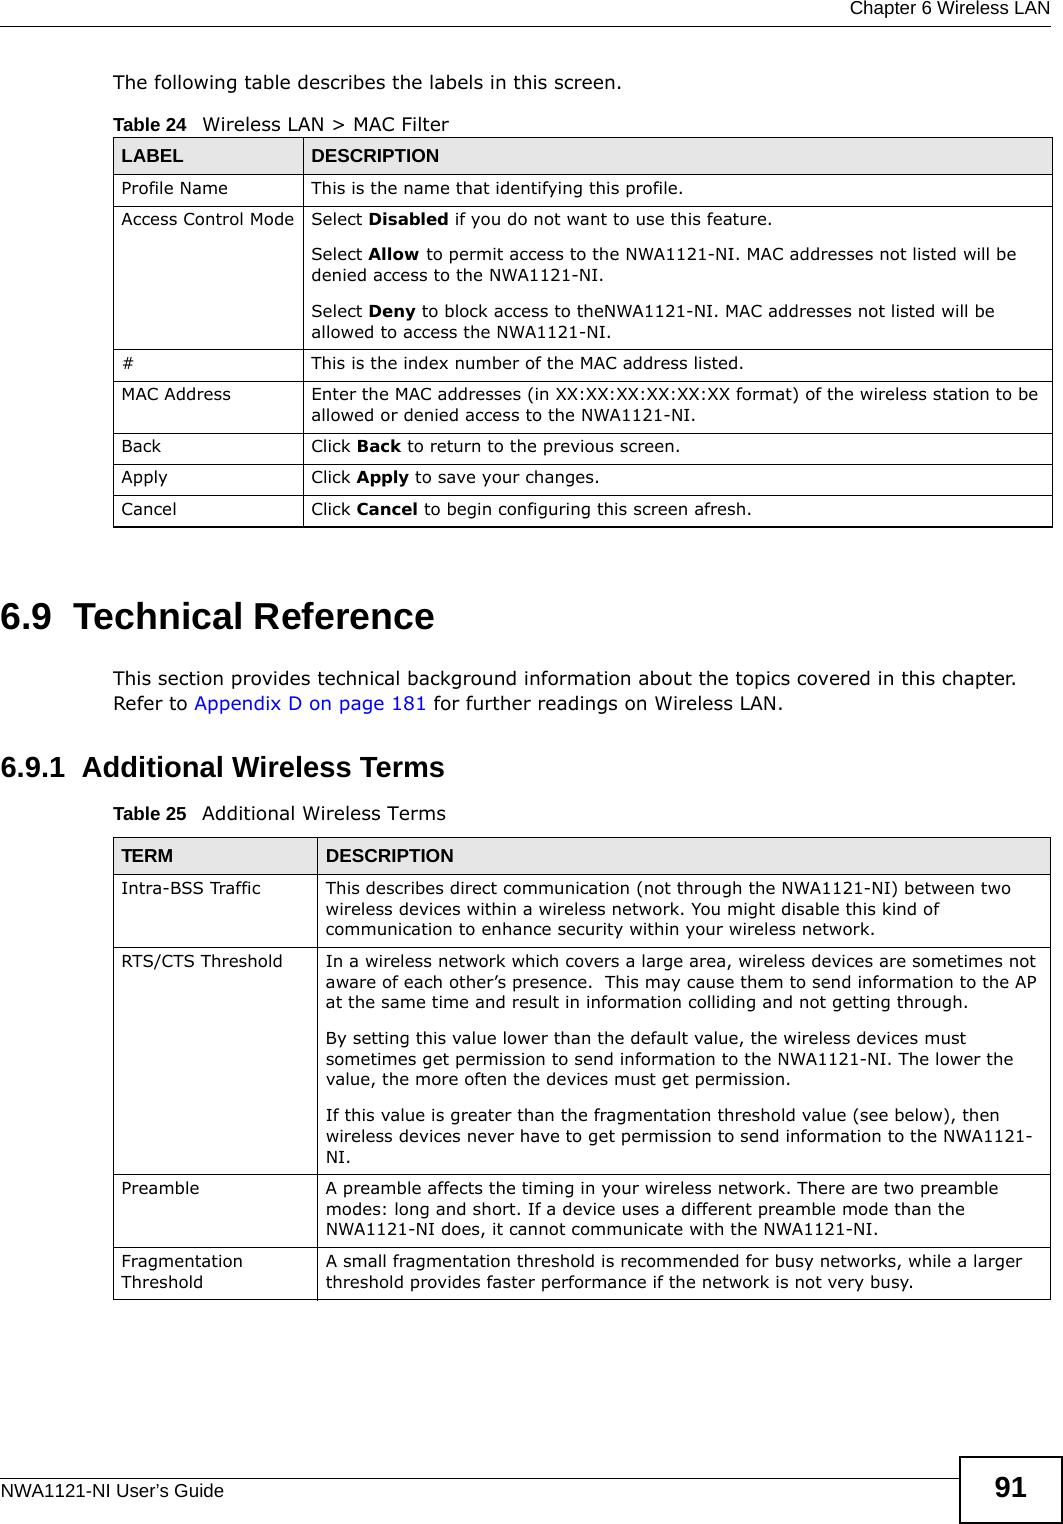  Chapter 6 Wireless LANNWA1121-NI User’s Guide 91The following table describes the labels in this screen.6.9  Technical ReferenceThis section provides technical background information about the topics covered in this chapter. Refer to Appendix D on page 181 for further readings on Wireless LAN.6.9.1  Additional Wireless TermsTable 25   Additional Wireless TermsTable 24   Wireless LAN &gt; MAC FilterLABEL DESCRIPTIONProfile Name This is the name that identifying this profile.Access Control Mode Select Disabled if you do not want to use this feature.Select Allow to permit access to the NWA1121-NI. MAC addresses not listed will be denied access to the NWA1121-NI.Select Deny to block access to theNWA1121-NI. MAC addresses not listed will be allowed to access the NWA1121-NI.#This is the index number of the MAC address listed.MAC Address Enter the MAC addresses (in XX:XX:XX:XX:XX:XX format) of the wireless station to be allowed or denied access to the NWA1121-NI.Back Click Back to return to the previous screen.Apply Click Apply to save your changes.Cancel Click Cancel to begin configuring this screen afresh.TERM DESCRIPTIONIntra-BSS Traffic This describes direct communication (not through the NWA1121-NI) between two wireless devices within a wireless network. You might disable this kind of communication to enhance security within your wireless network.RTS/CTS Threshold In a wireless network which covers a large area, wireless devices are sometimes not aware of each other’s presence.  This may cause them to send information to the AP at the same time and result in information colliding and not getting through.By setting this value lower than the default value, the wireless devices must sometimes get permission to send information to the NWA1121-NI. The lower the value, the more often the devices must get permission.If this value is greater than the fragmentation threshold value (see below), then wireless devices never have to get permission to send information to the NWA1121-NI.Preamble A preamble affects the timing in your wireless network. There are two preamble modes: long and short. If a device uses a different preamble mode than the NWA1121-NI does, it cannot communicate with the NWA1121-NI.Fragmentation ThresholdA small fragmentation threshold is recommended for busy networks, while a larger threshold provides faster performance if the network is not very busy.